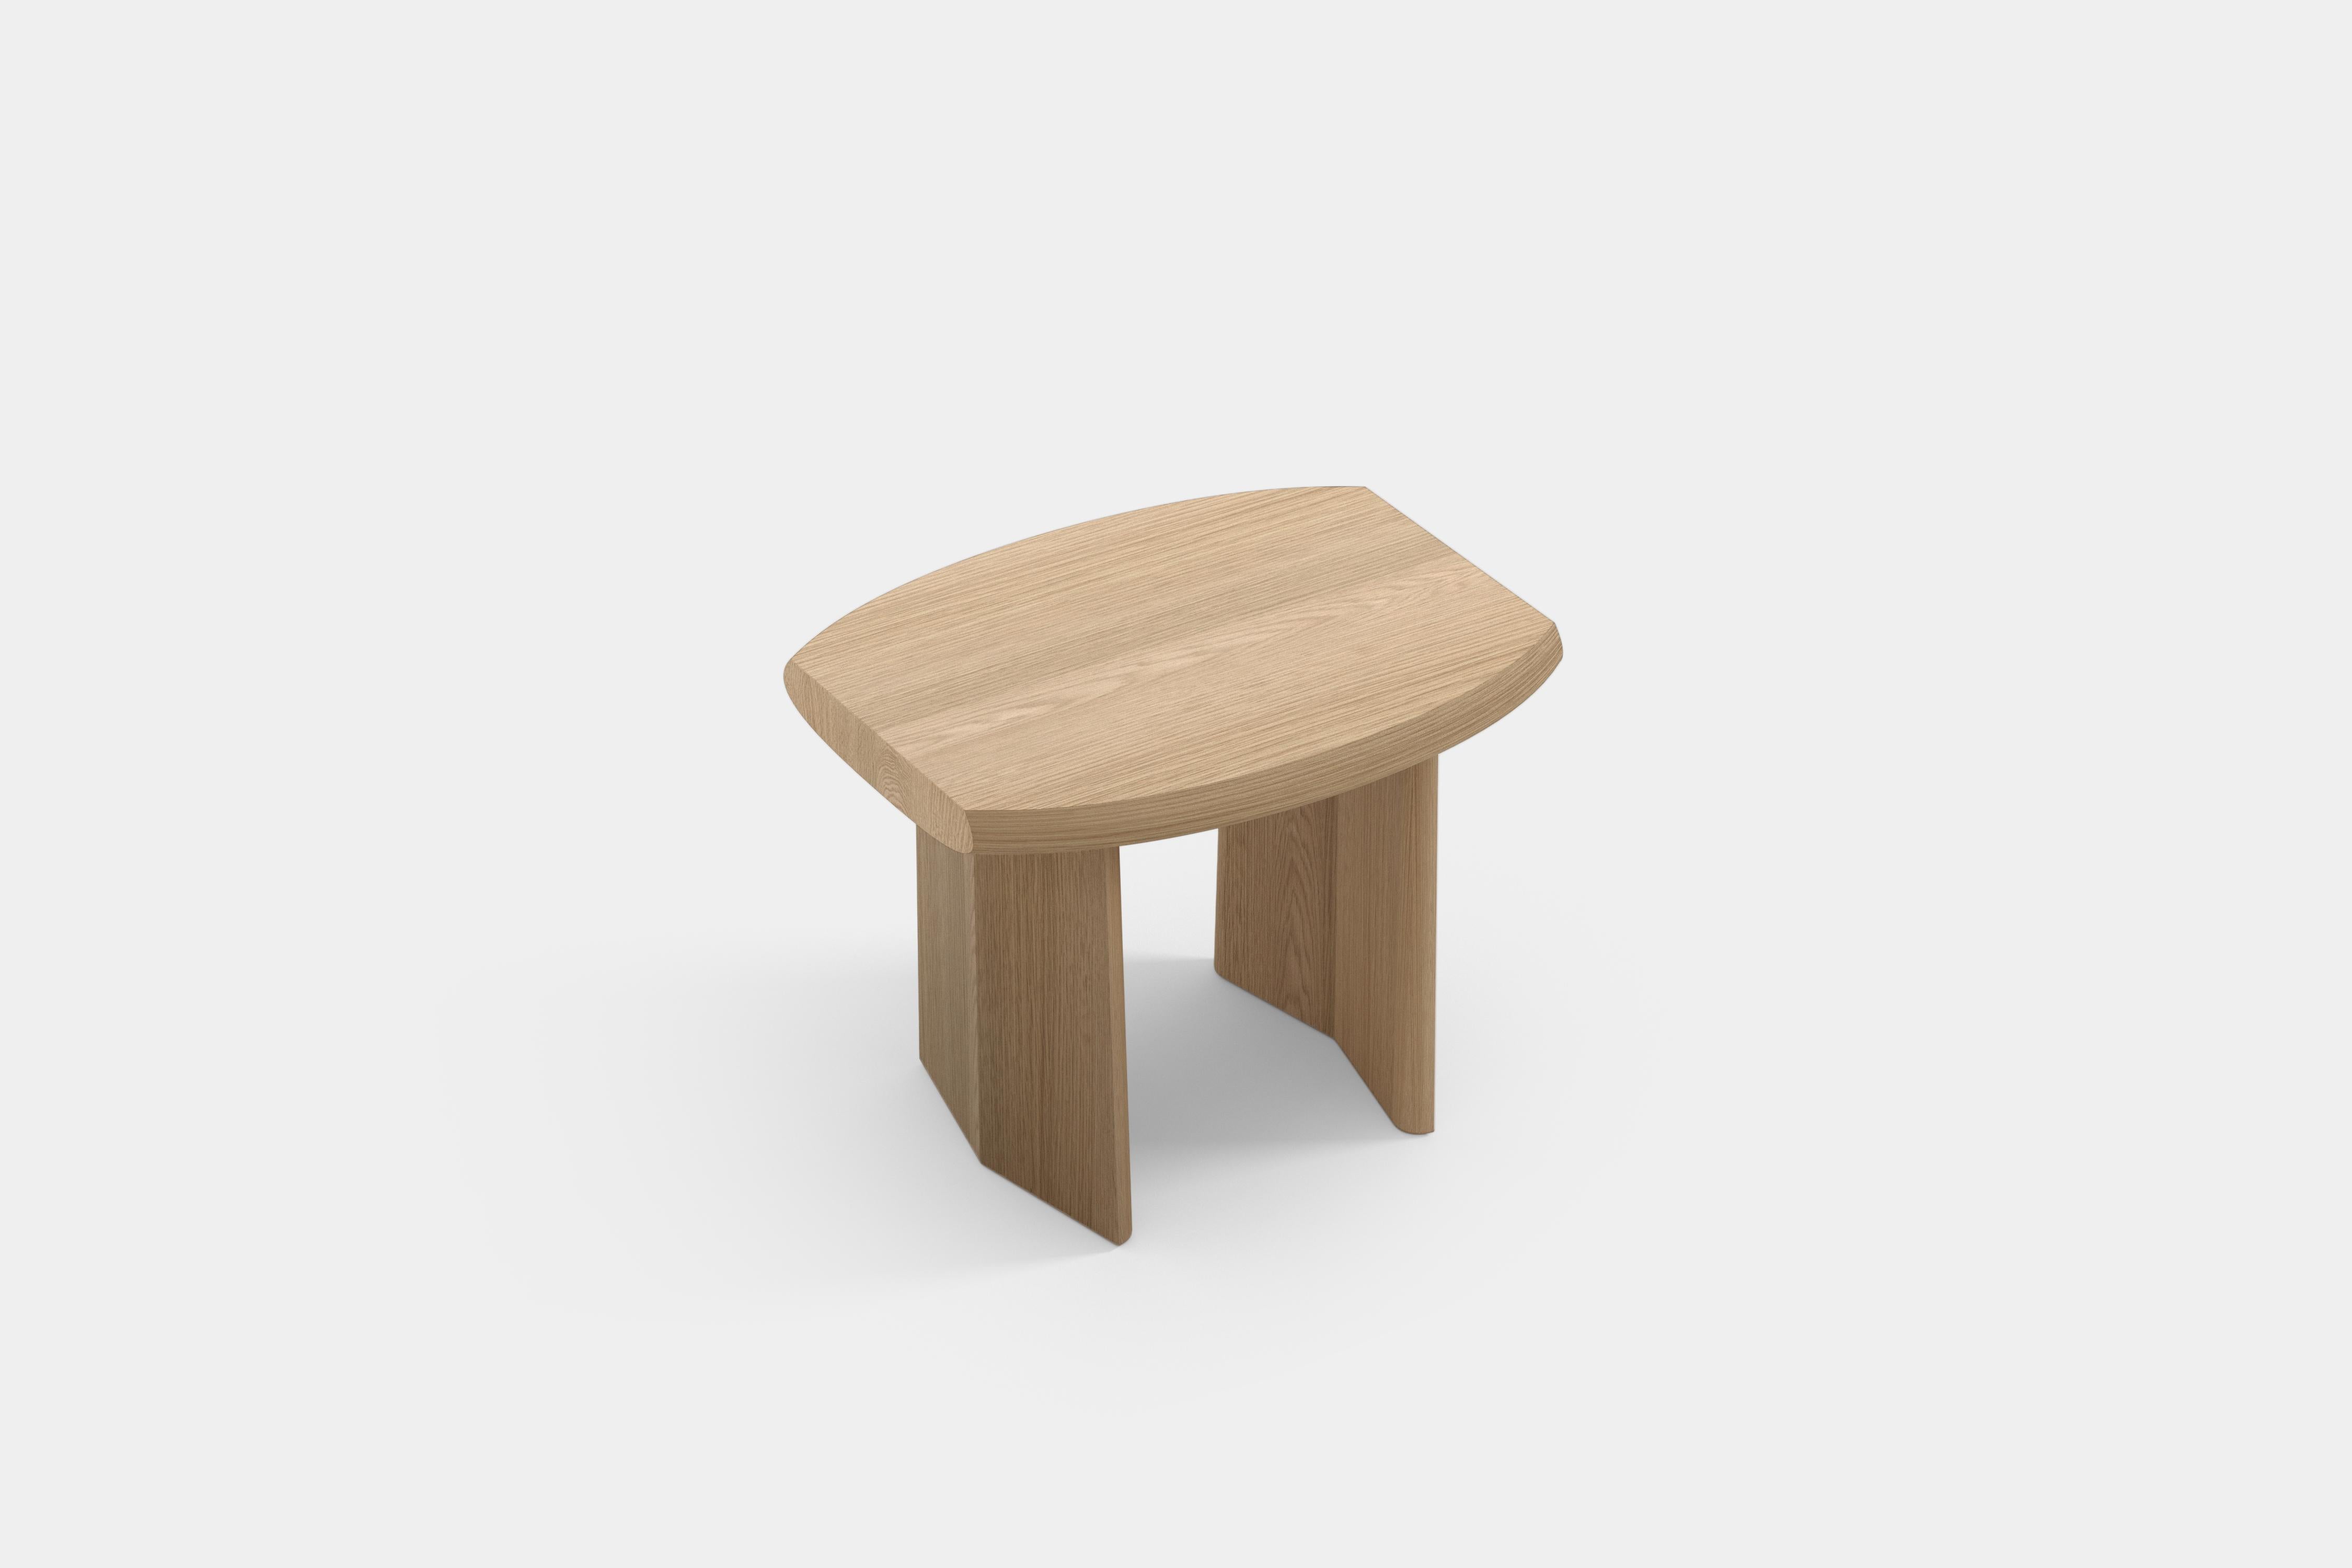 Set of two peana side table, night stand in oak natural wood by Joel Escalona.

Peana, which in English translates to base or pedestal, is a series of tables and different surfaces inspired by the idea of creating worthy furniture pieces to place